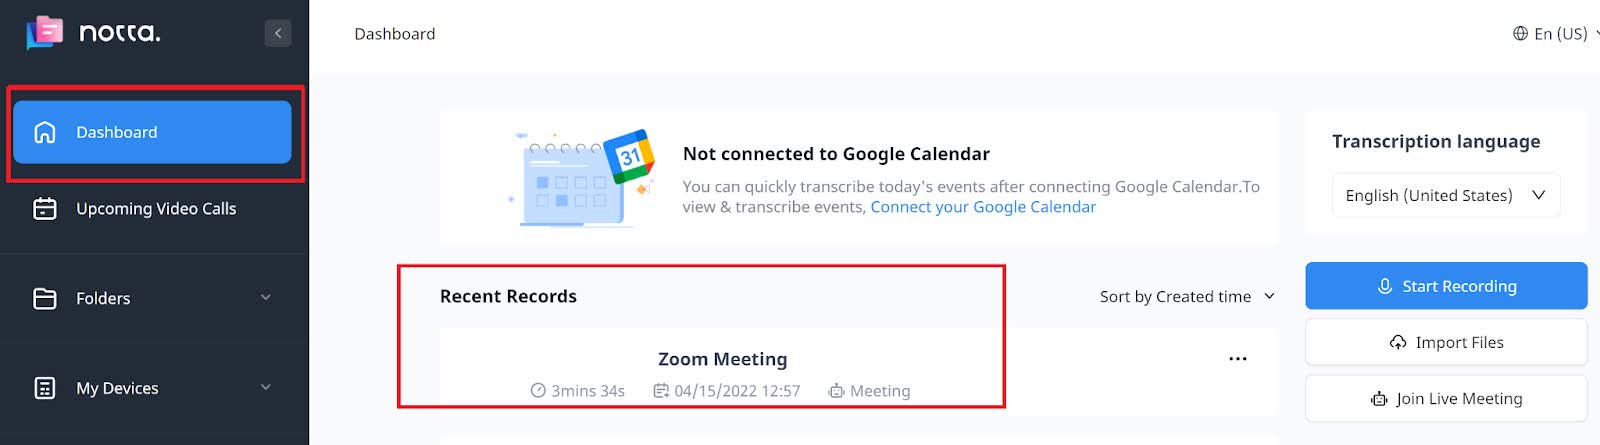 access your Zoom meeting audio anytime